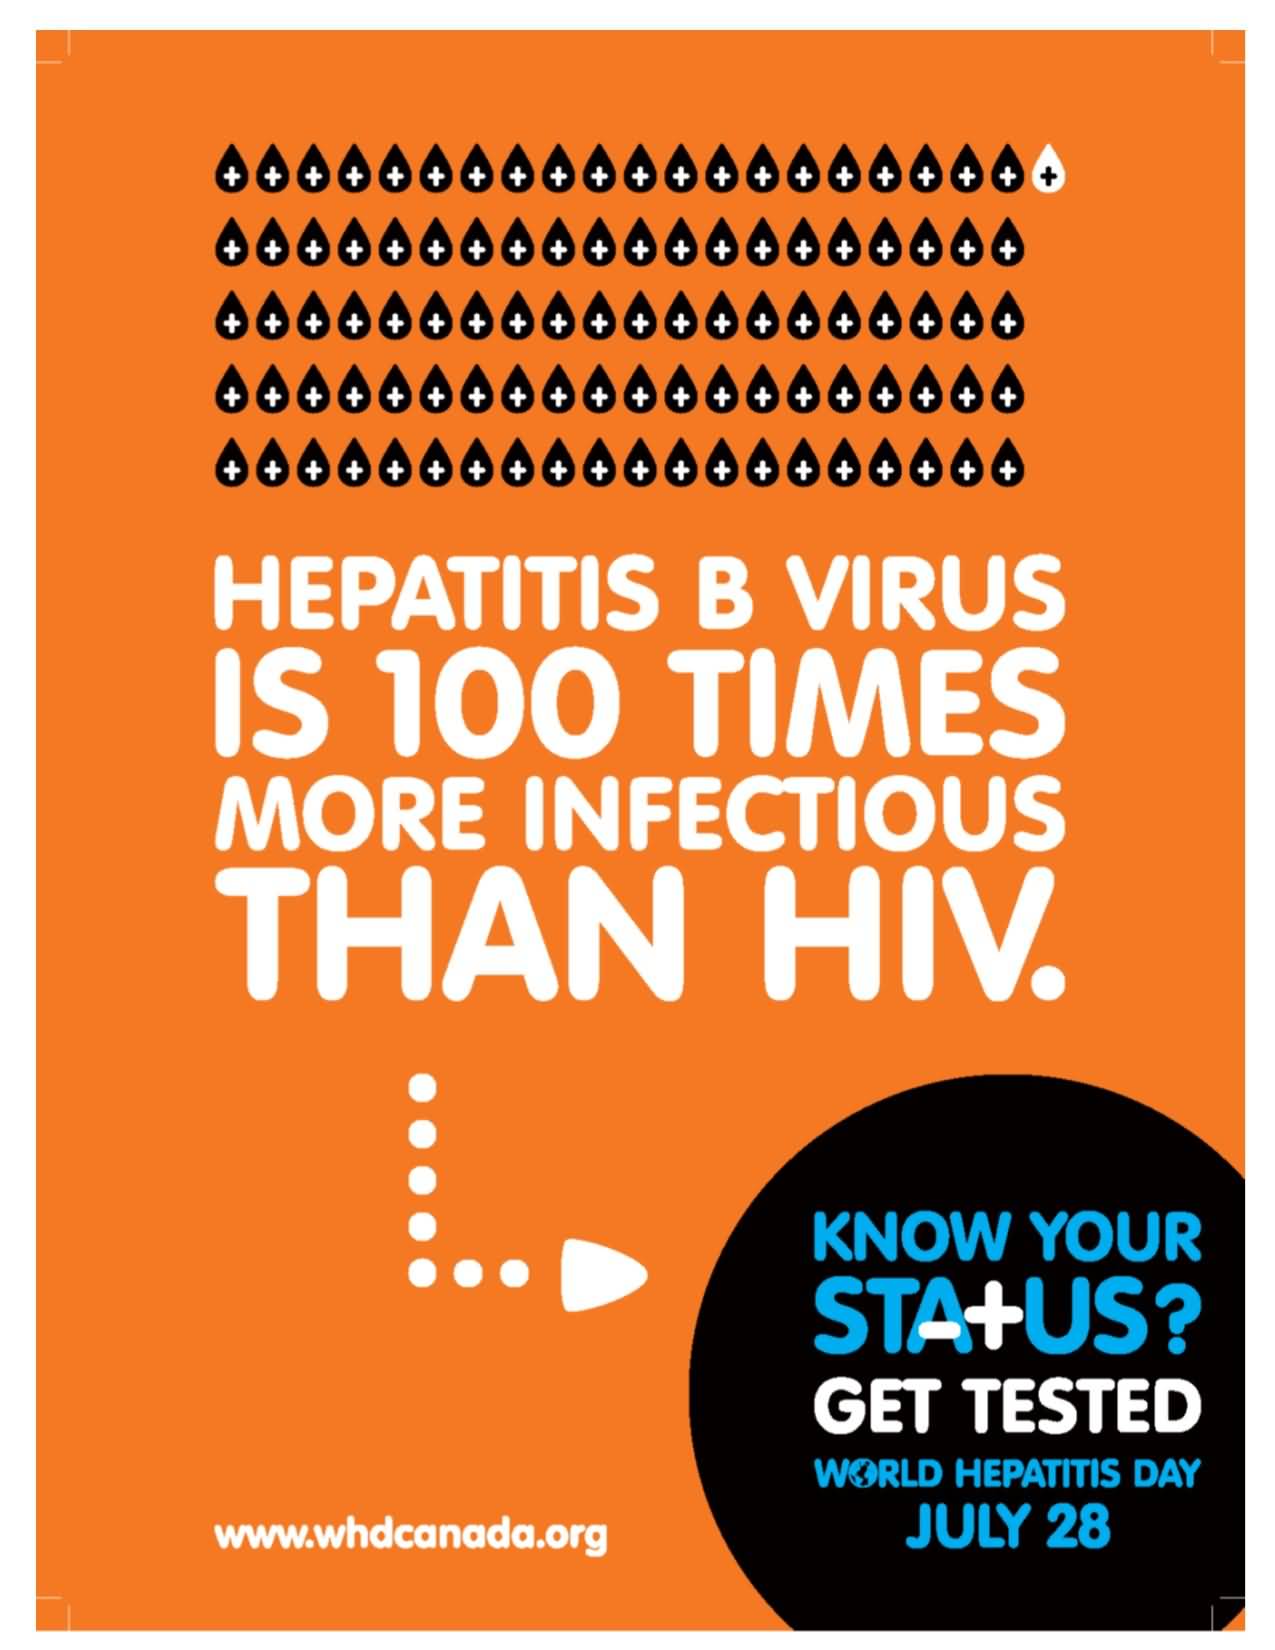 Hepatitis B Virus Is 100 Times More Infectious Than HIV – World Hepatitis Day